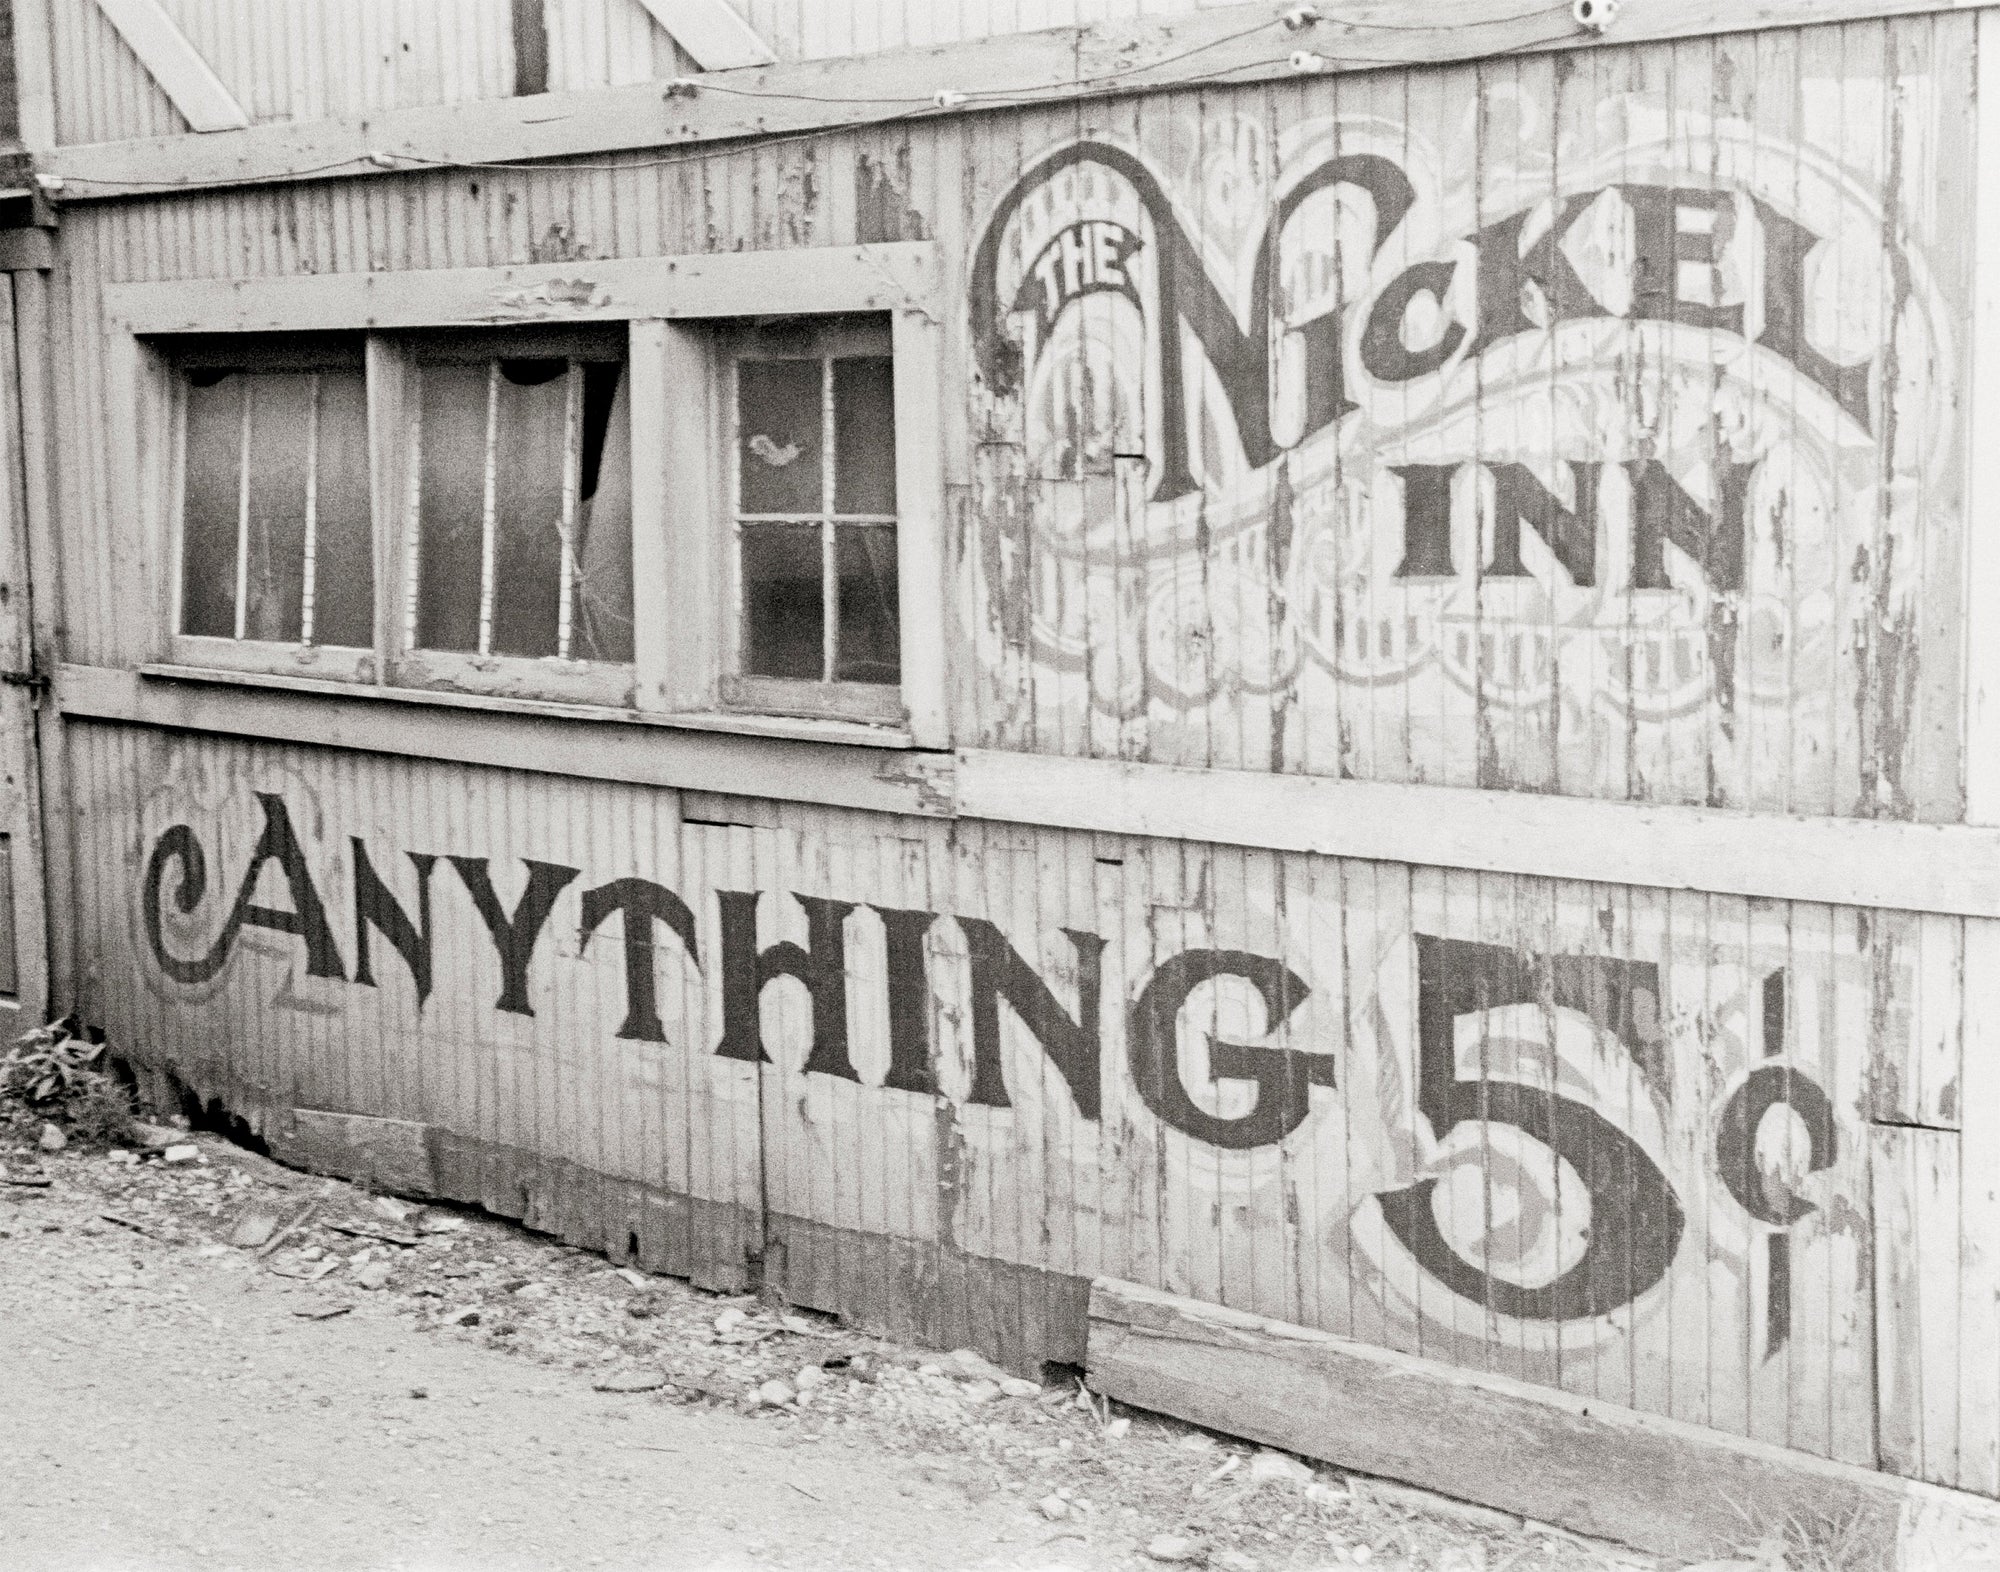 Lunch Store Calligraphic Sign for the Nickel Inn Historical Pix